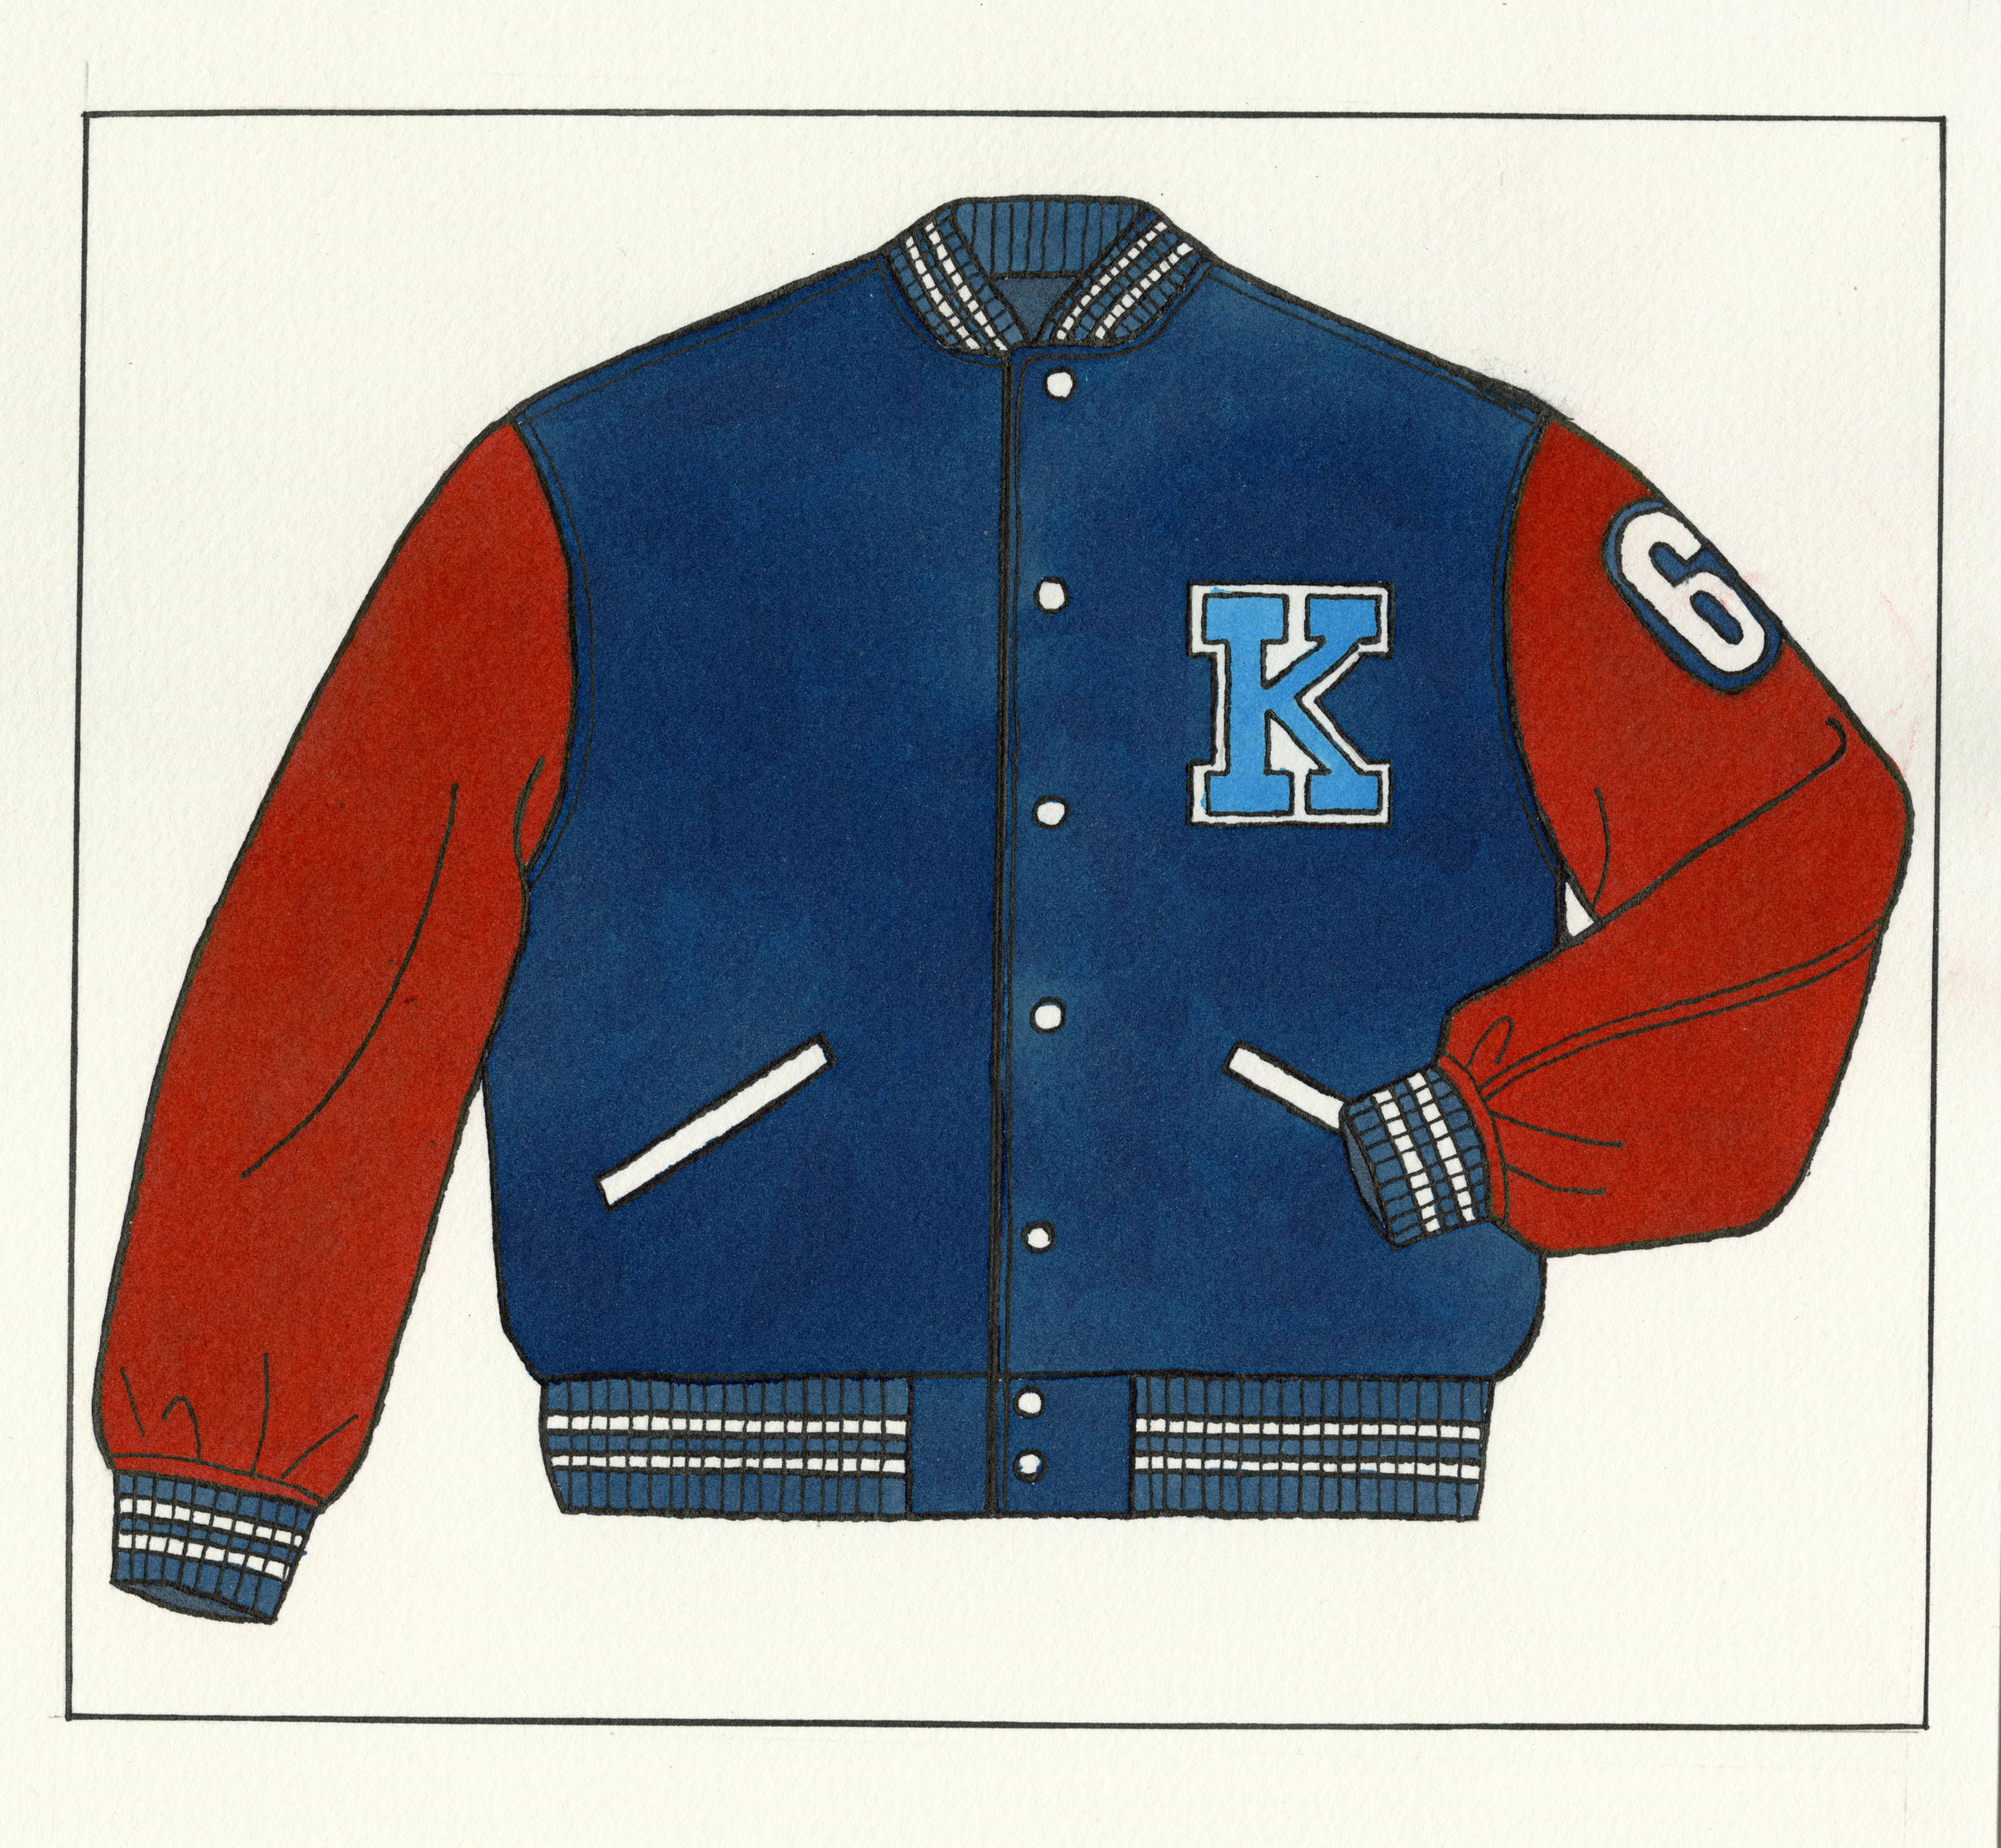 Letterman Jacket History - Why the Varsity Jacket is the Uniform of Winners